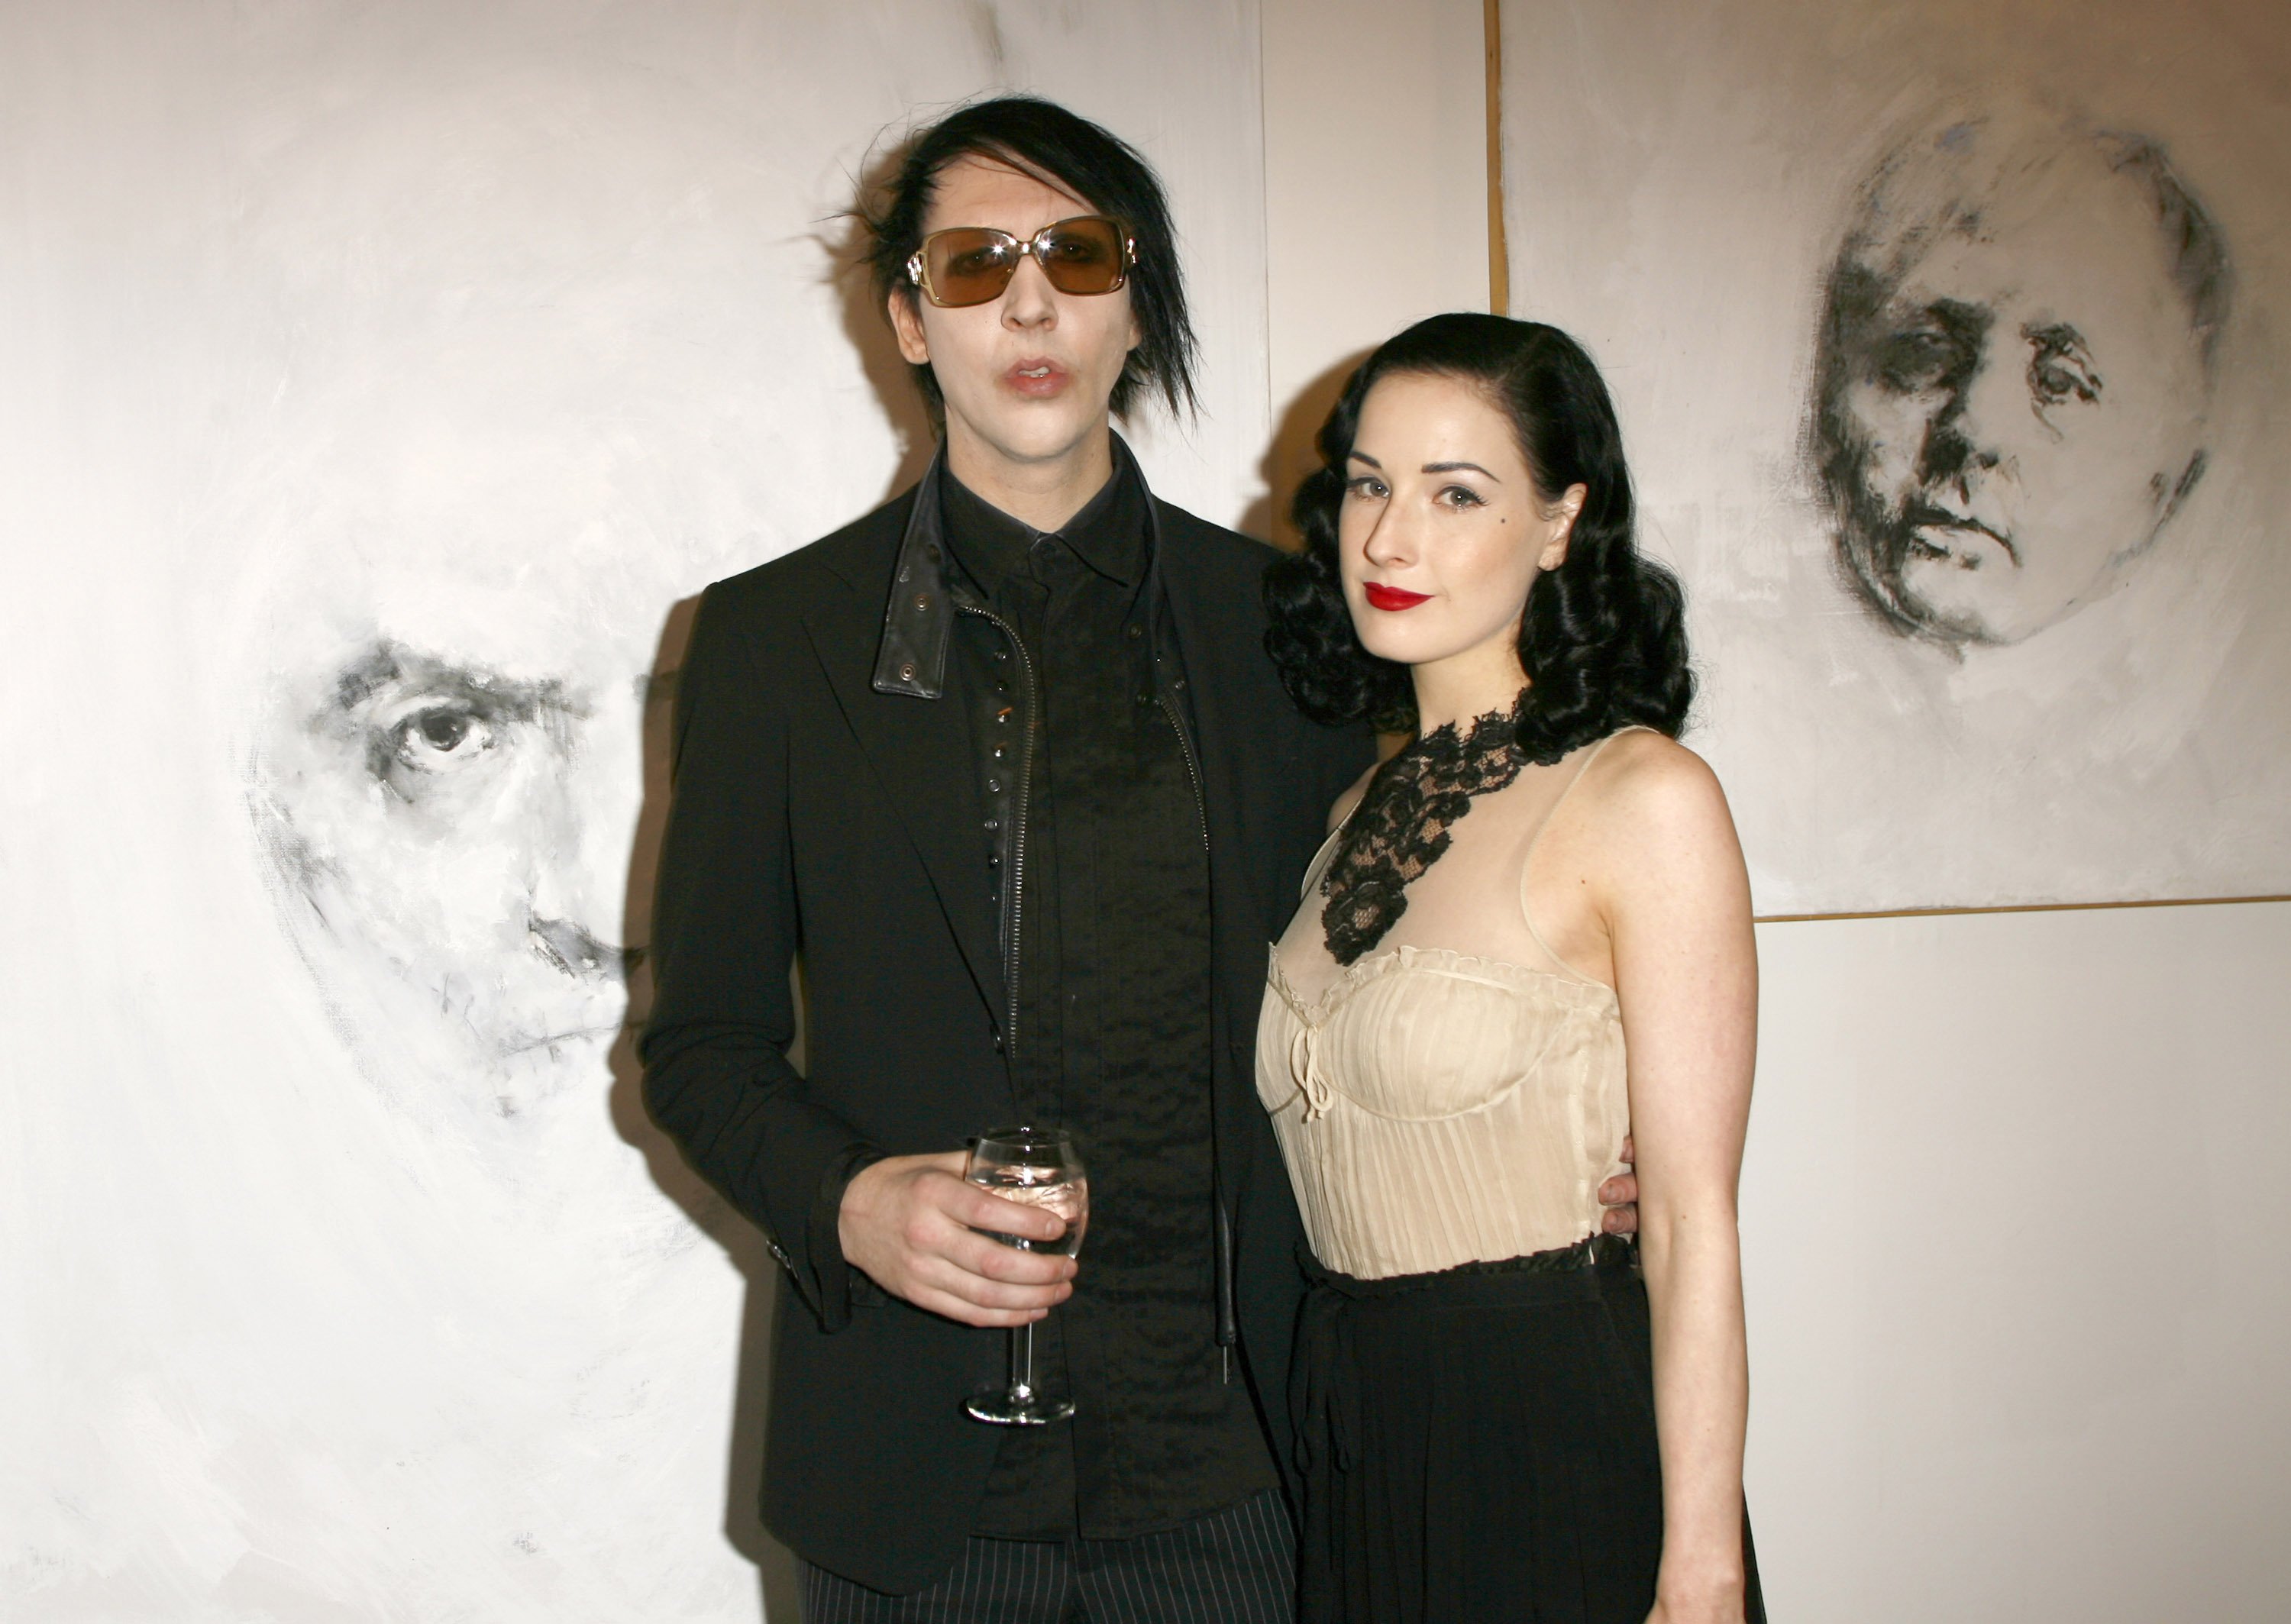 Marilyn Manson and Dita Von Teese at the premiere of the American Exhibition of Gravleur hosted by Johnny Depp and Trigg Ison from June 2 to 20, 2006 | Source: Getty Images